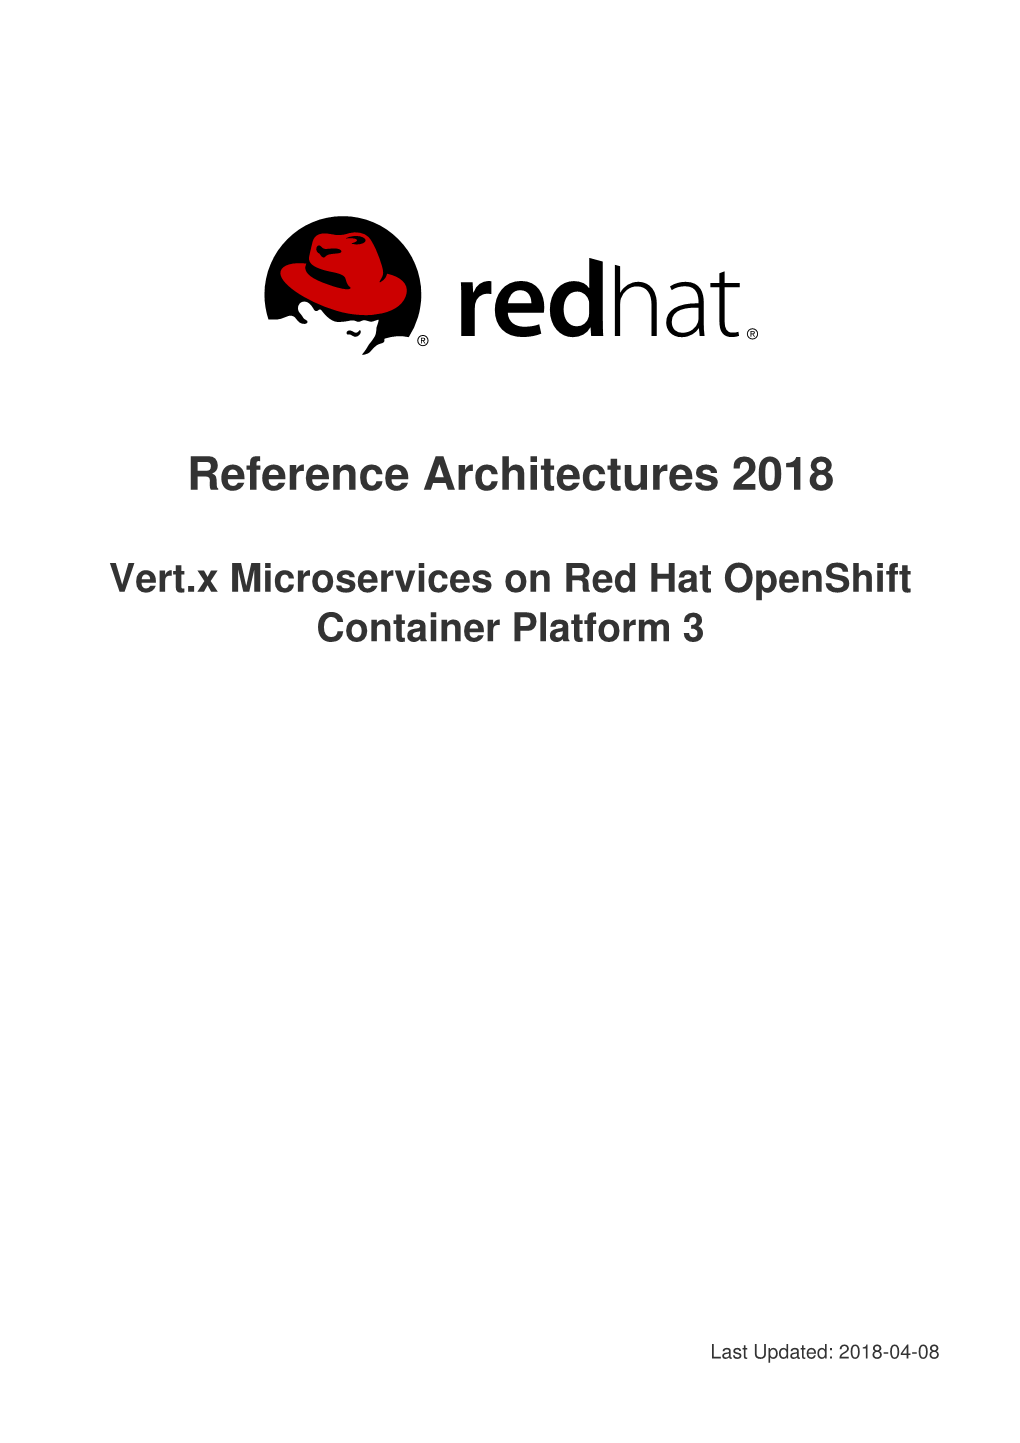 Vert.X Microservices on Red Hat Openshift Container Platform 3